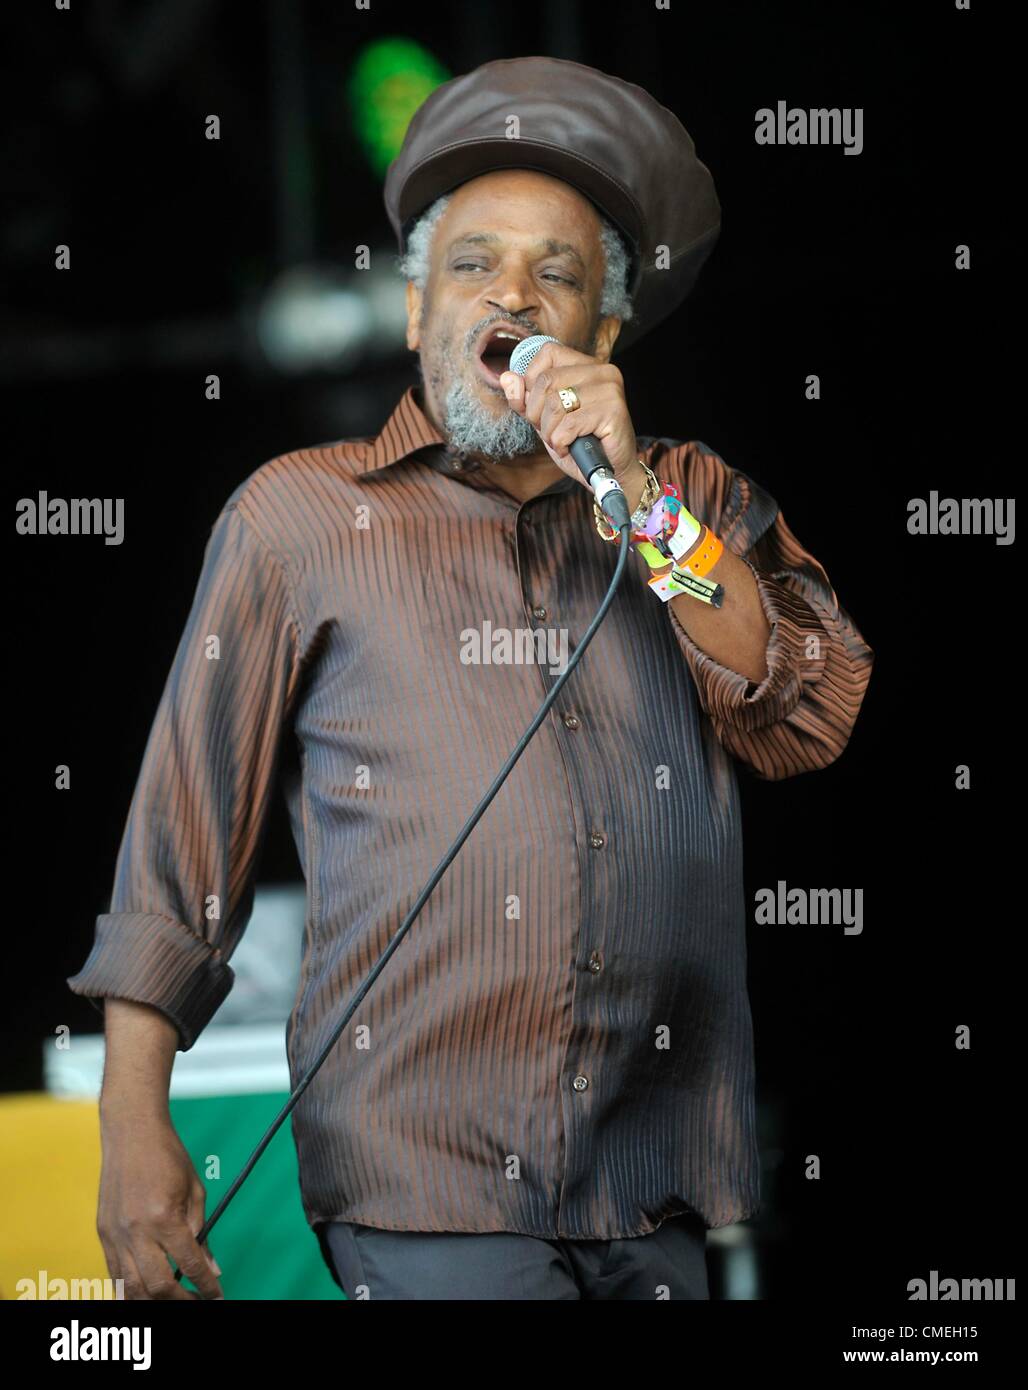 29th July 2012. Little Roy live on stage at Camp Bestival Lulworth castle Dorset. Stock Photo